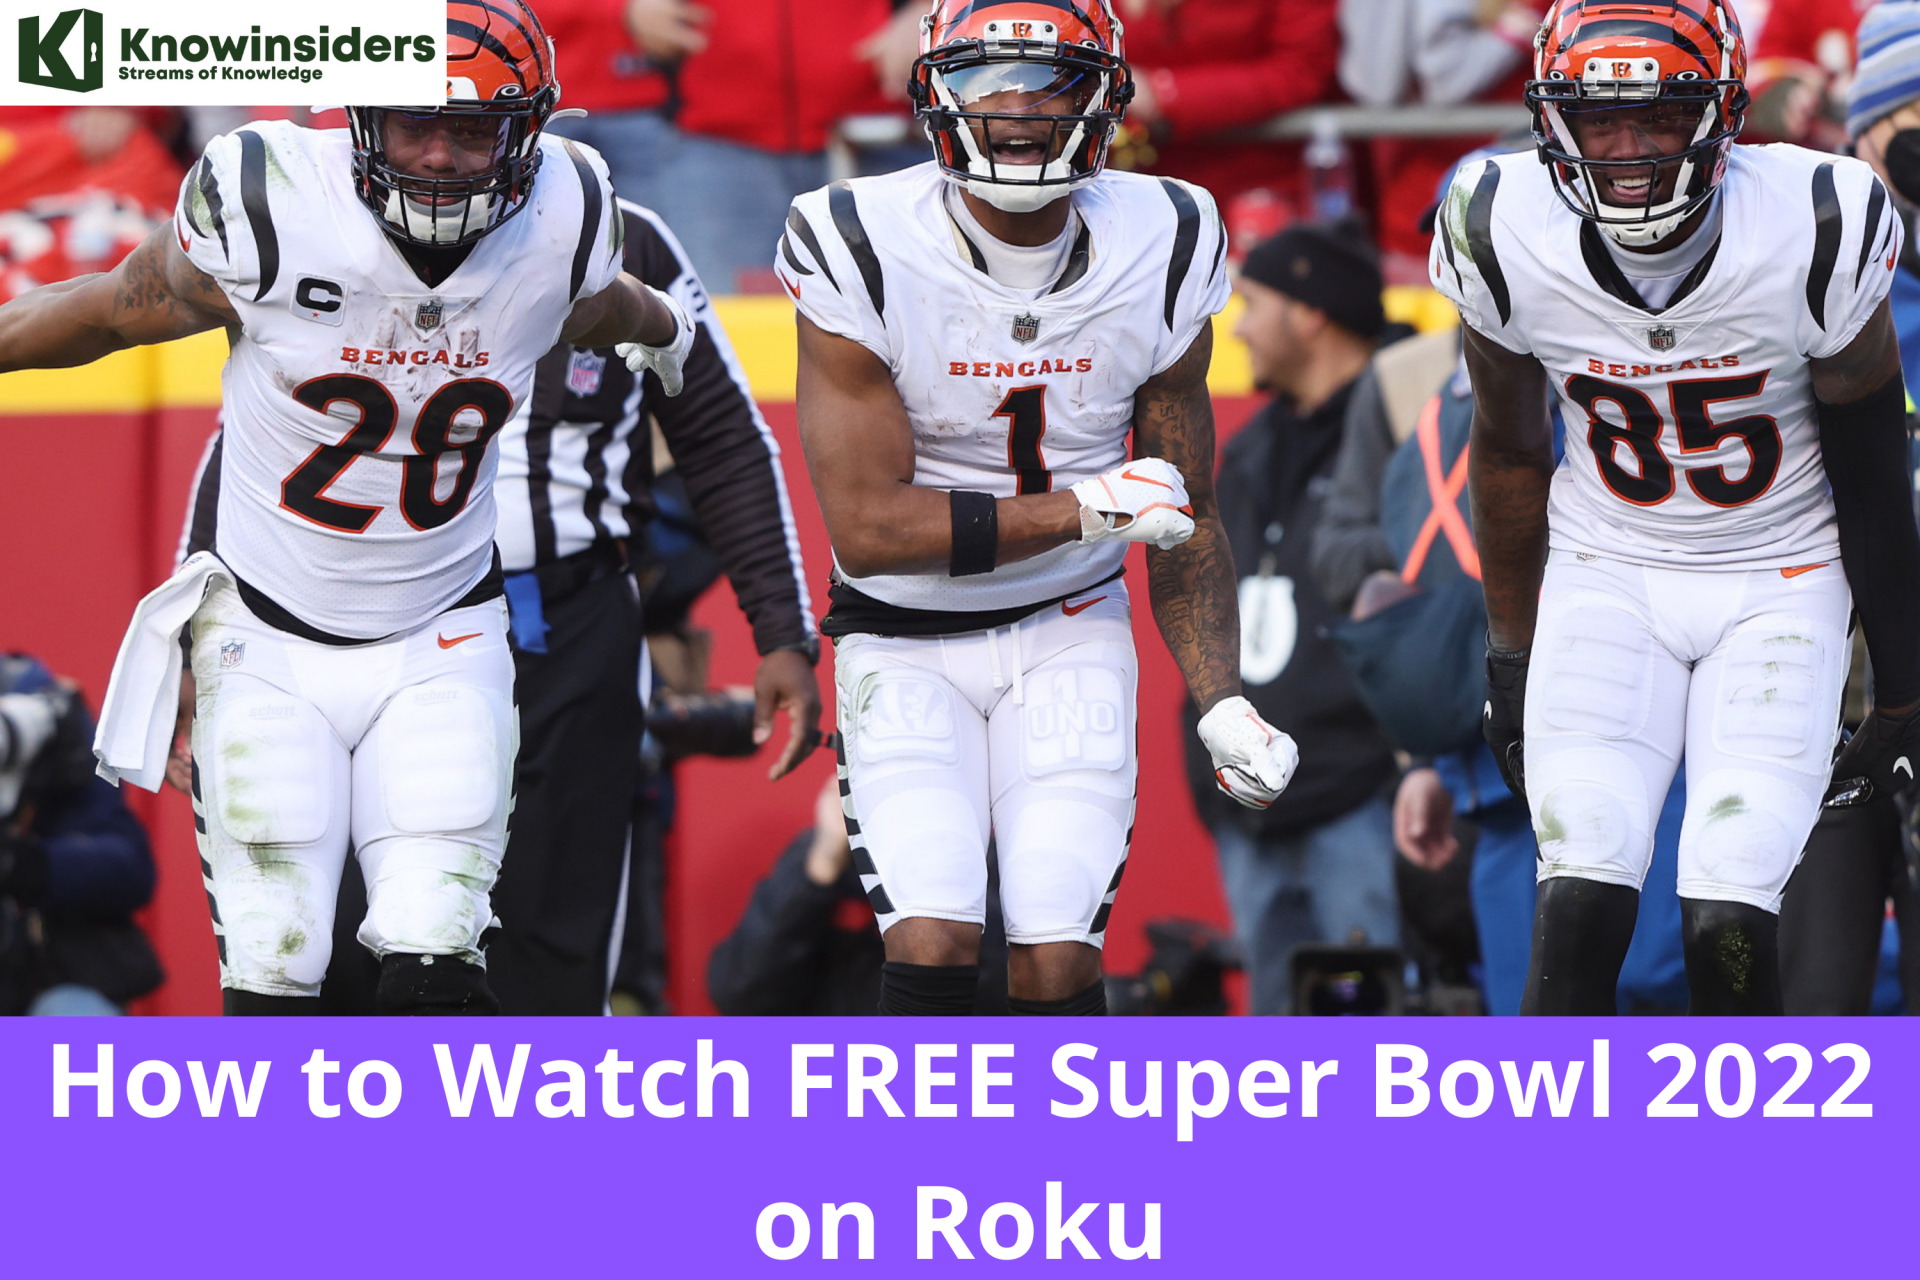 How to Watch FREE Super Bowl 2022 on Roku